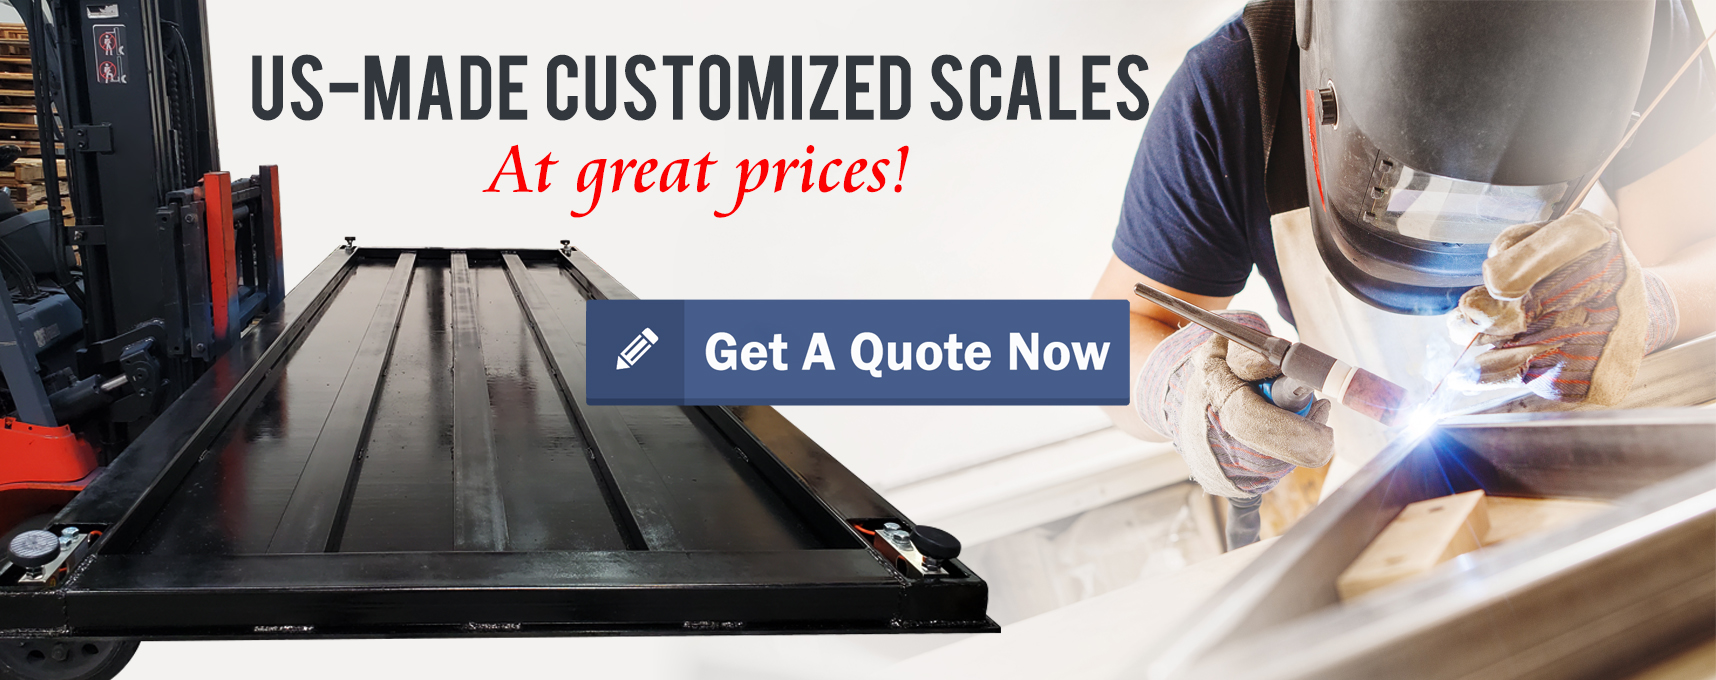 CAS SW-10RS & SW-20RS POS Interface Scales - Prime USA Scales